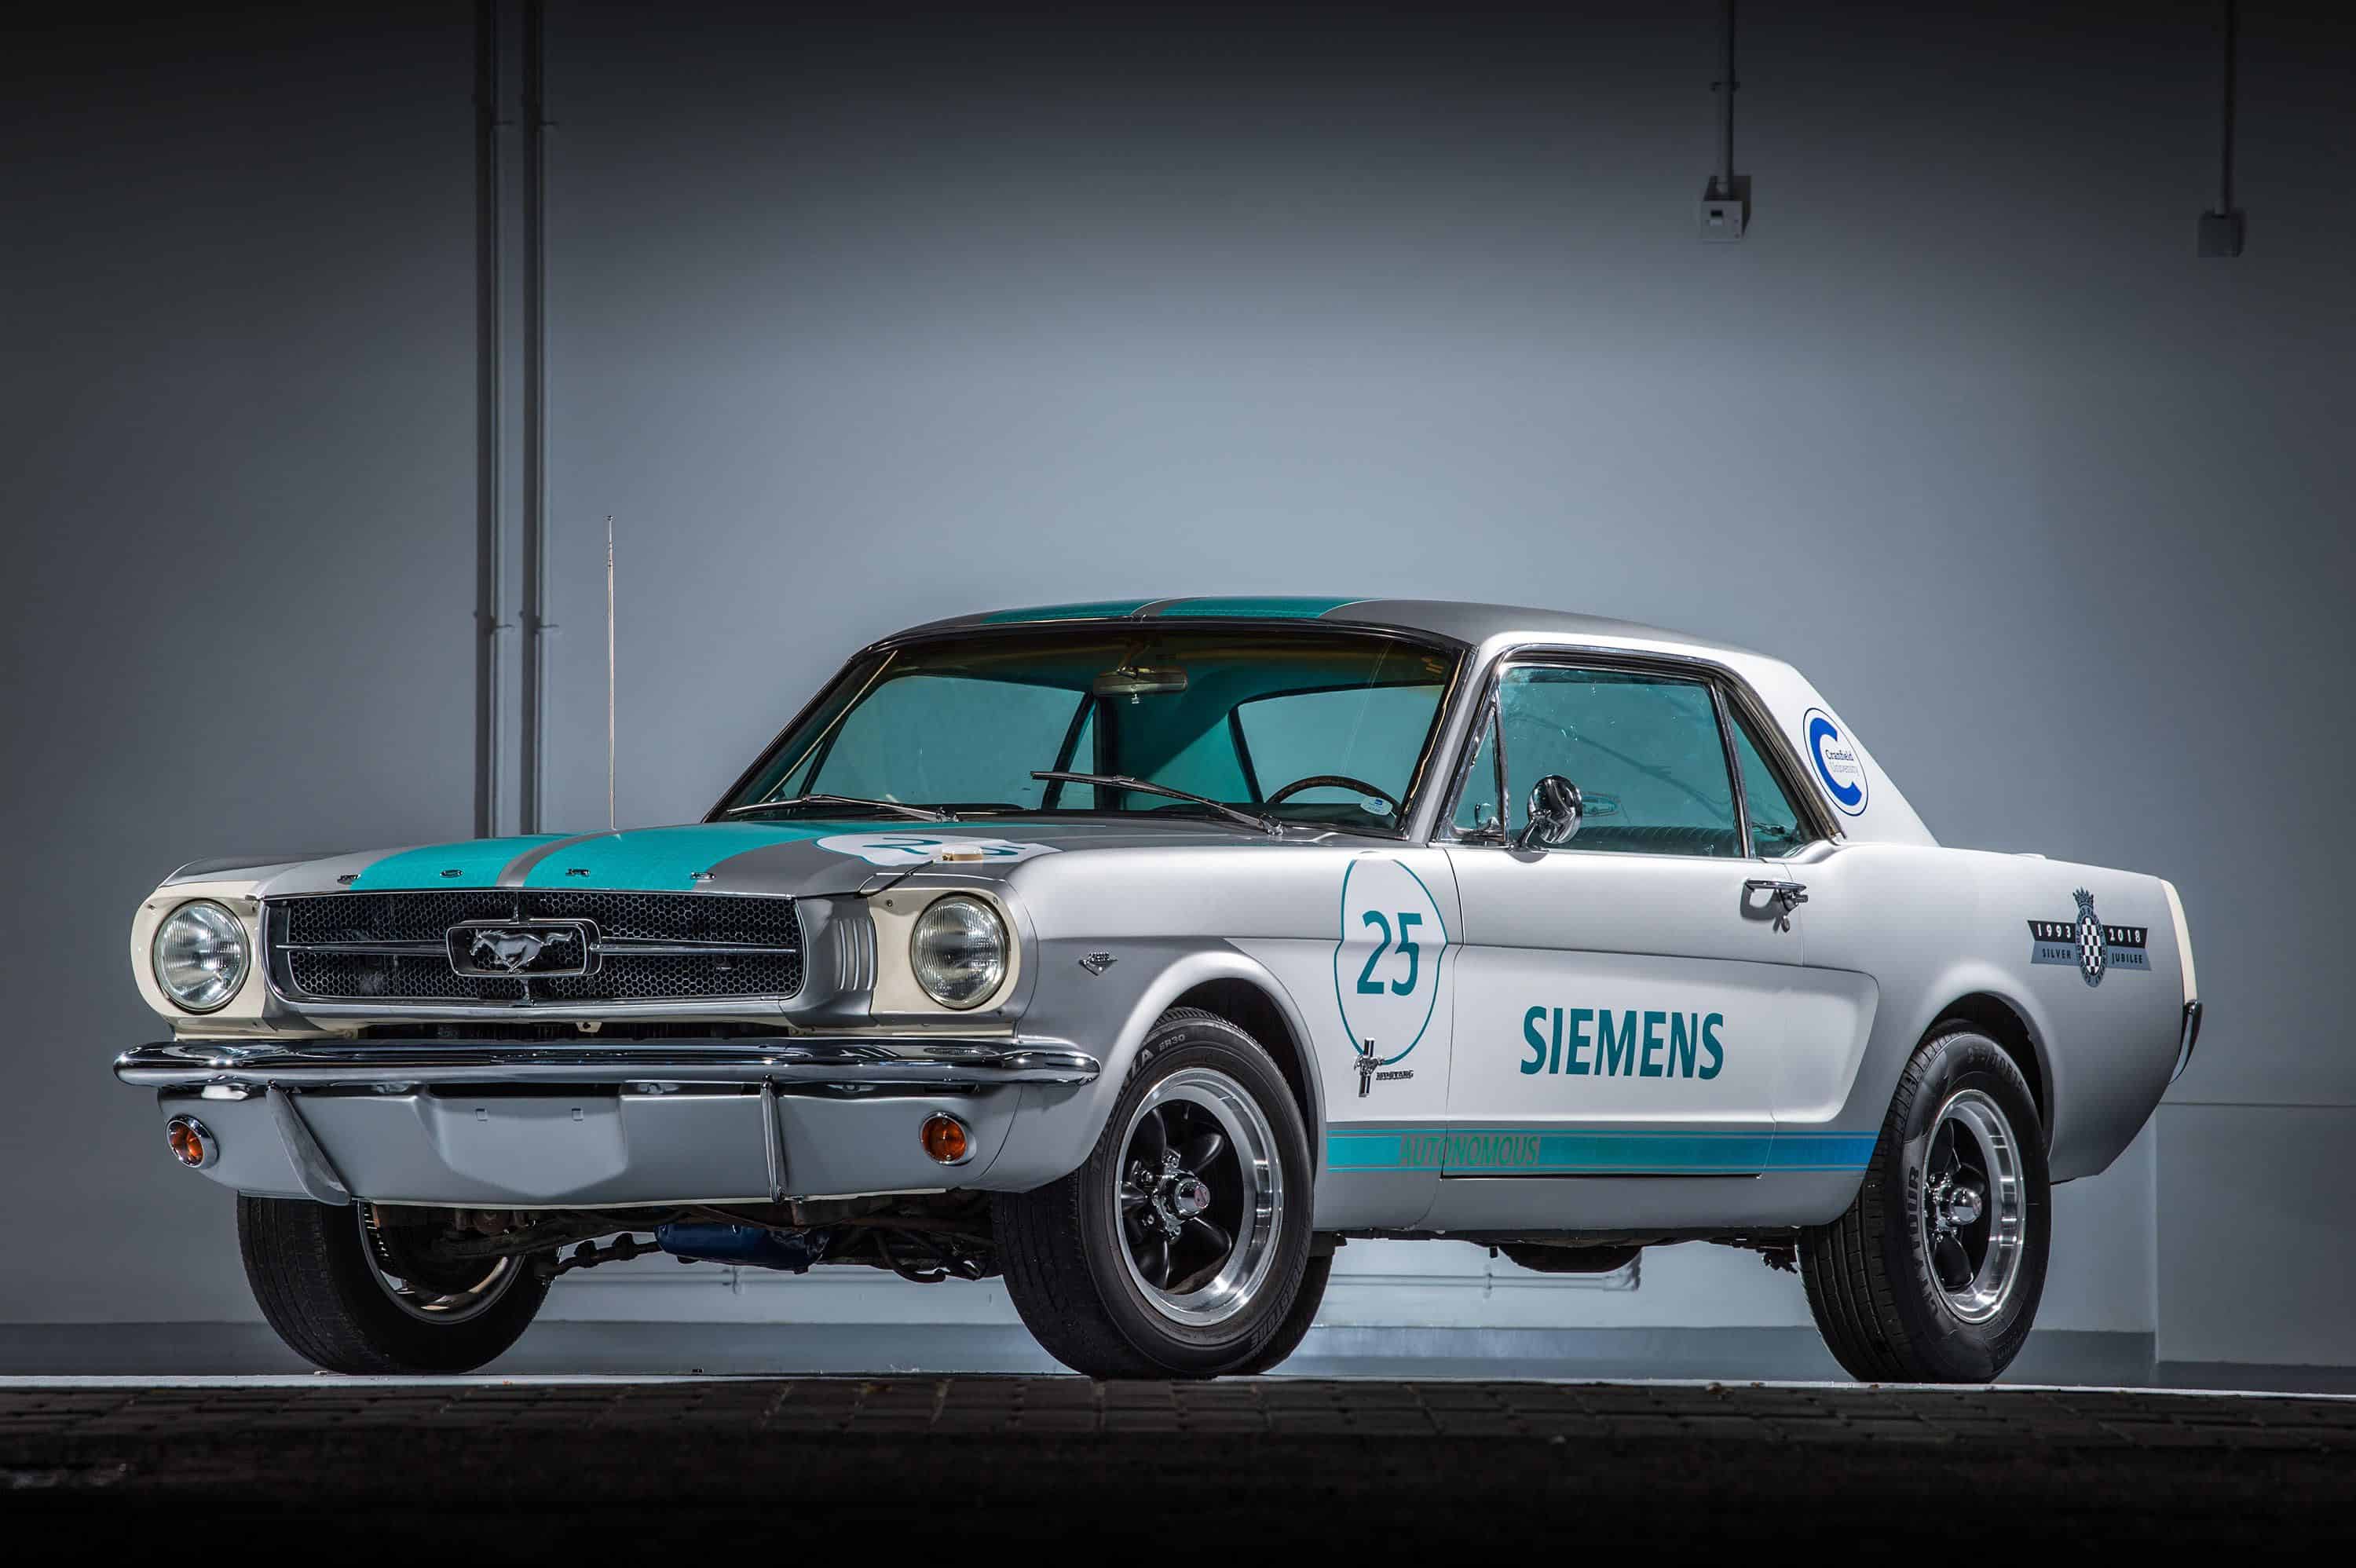 This self-driving Ford Mustang will attempt the hill climb at the Goodwood Festival of Speed. | Siemens photo